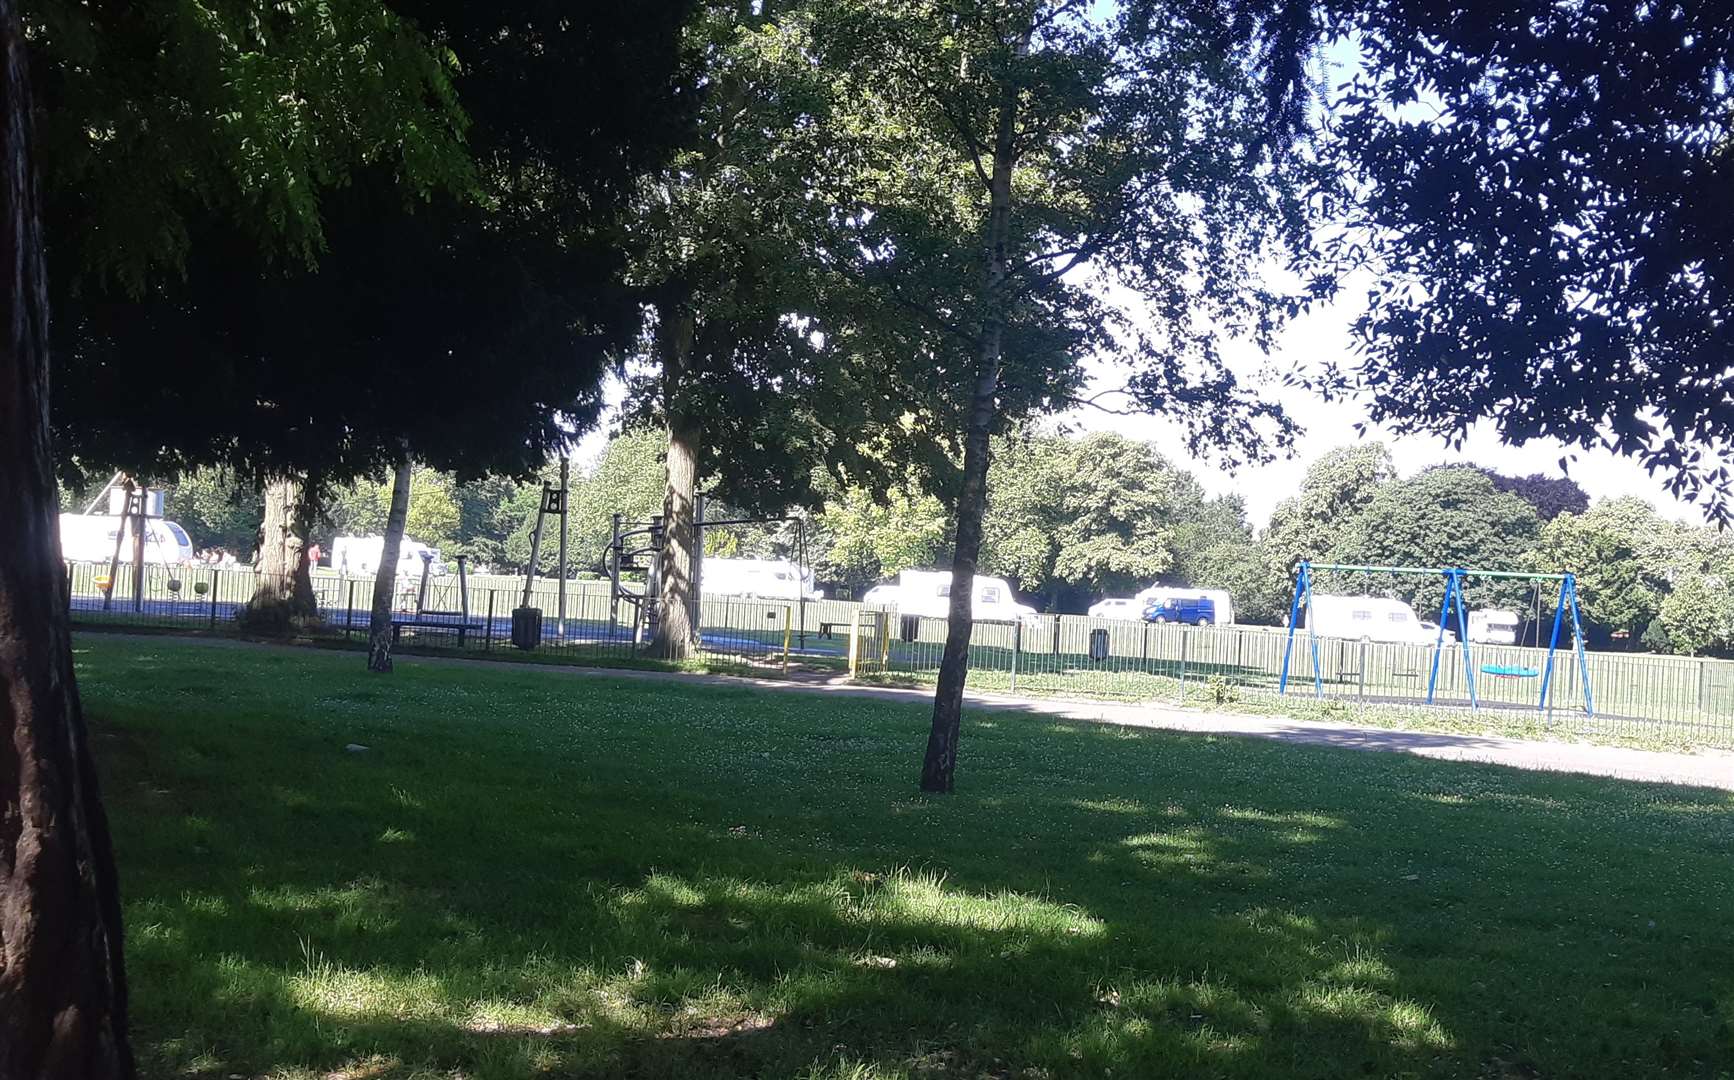 Around 15 caravans have pitched up in Gillingham Park, Canterbury Street, Gillingham